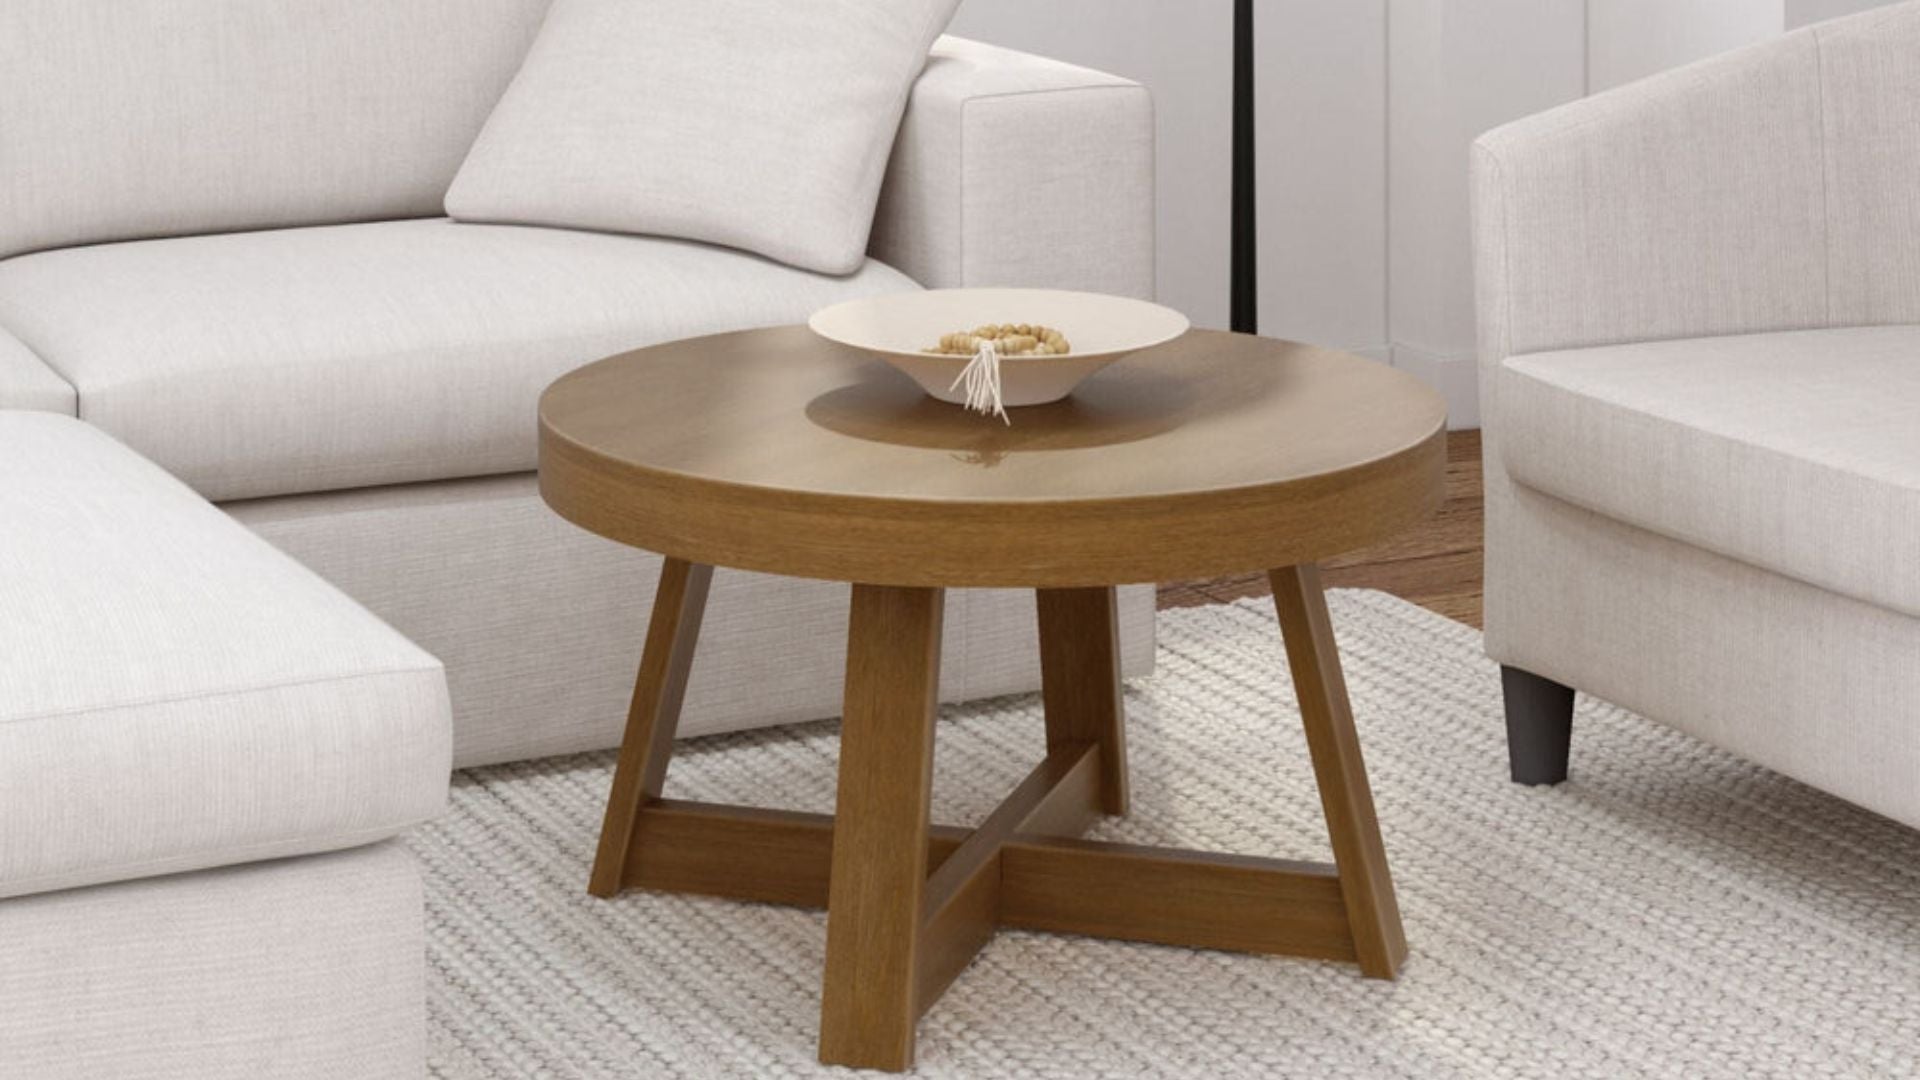 Classic round wood coffee table in pecan wirebrush